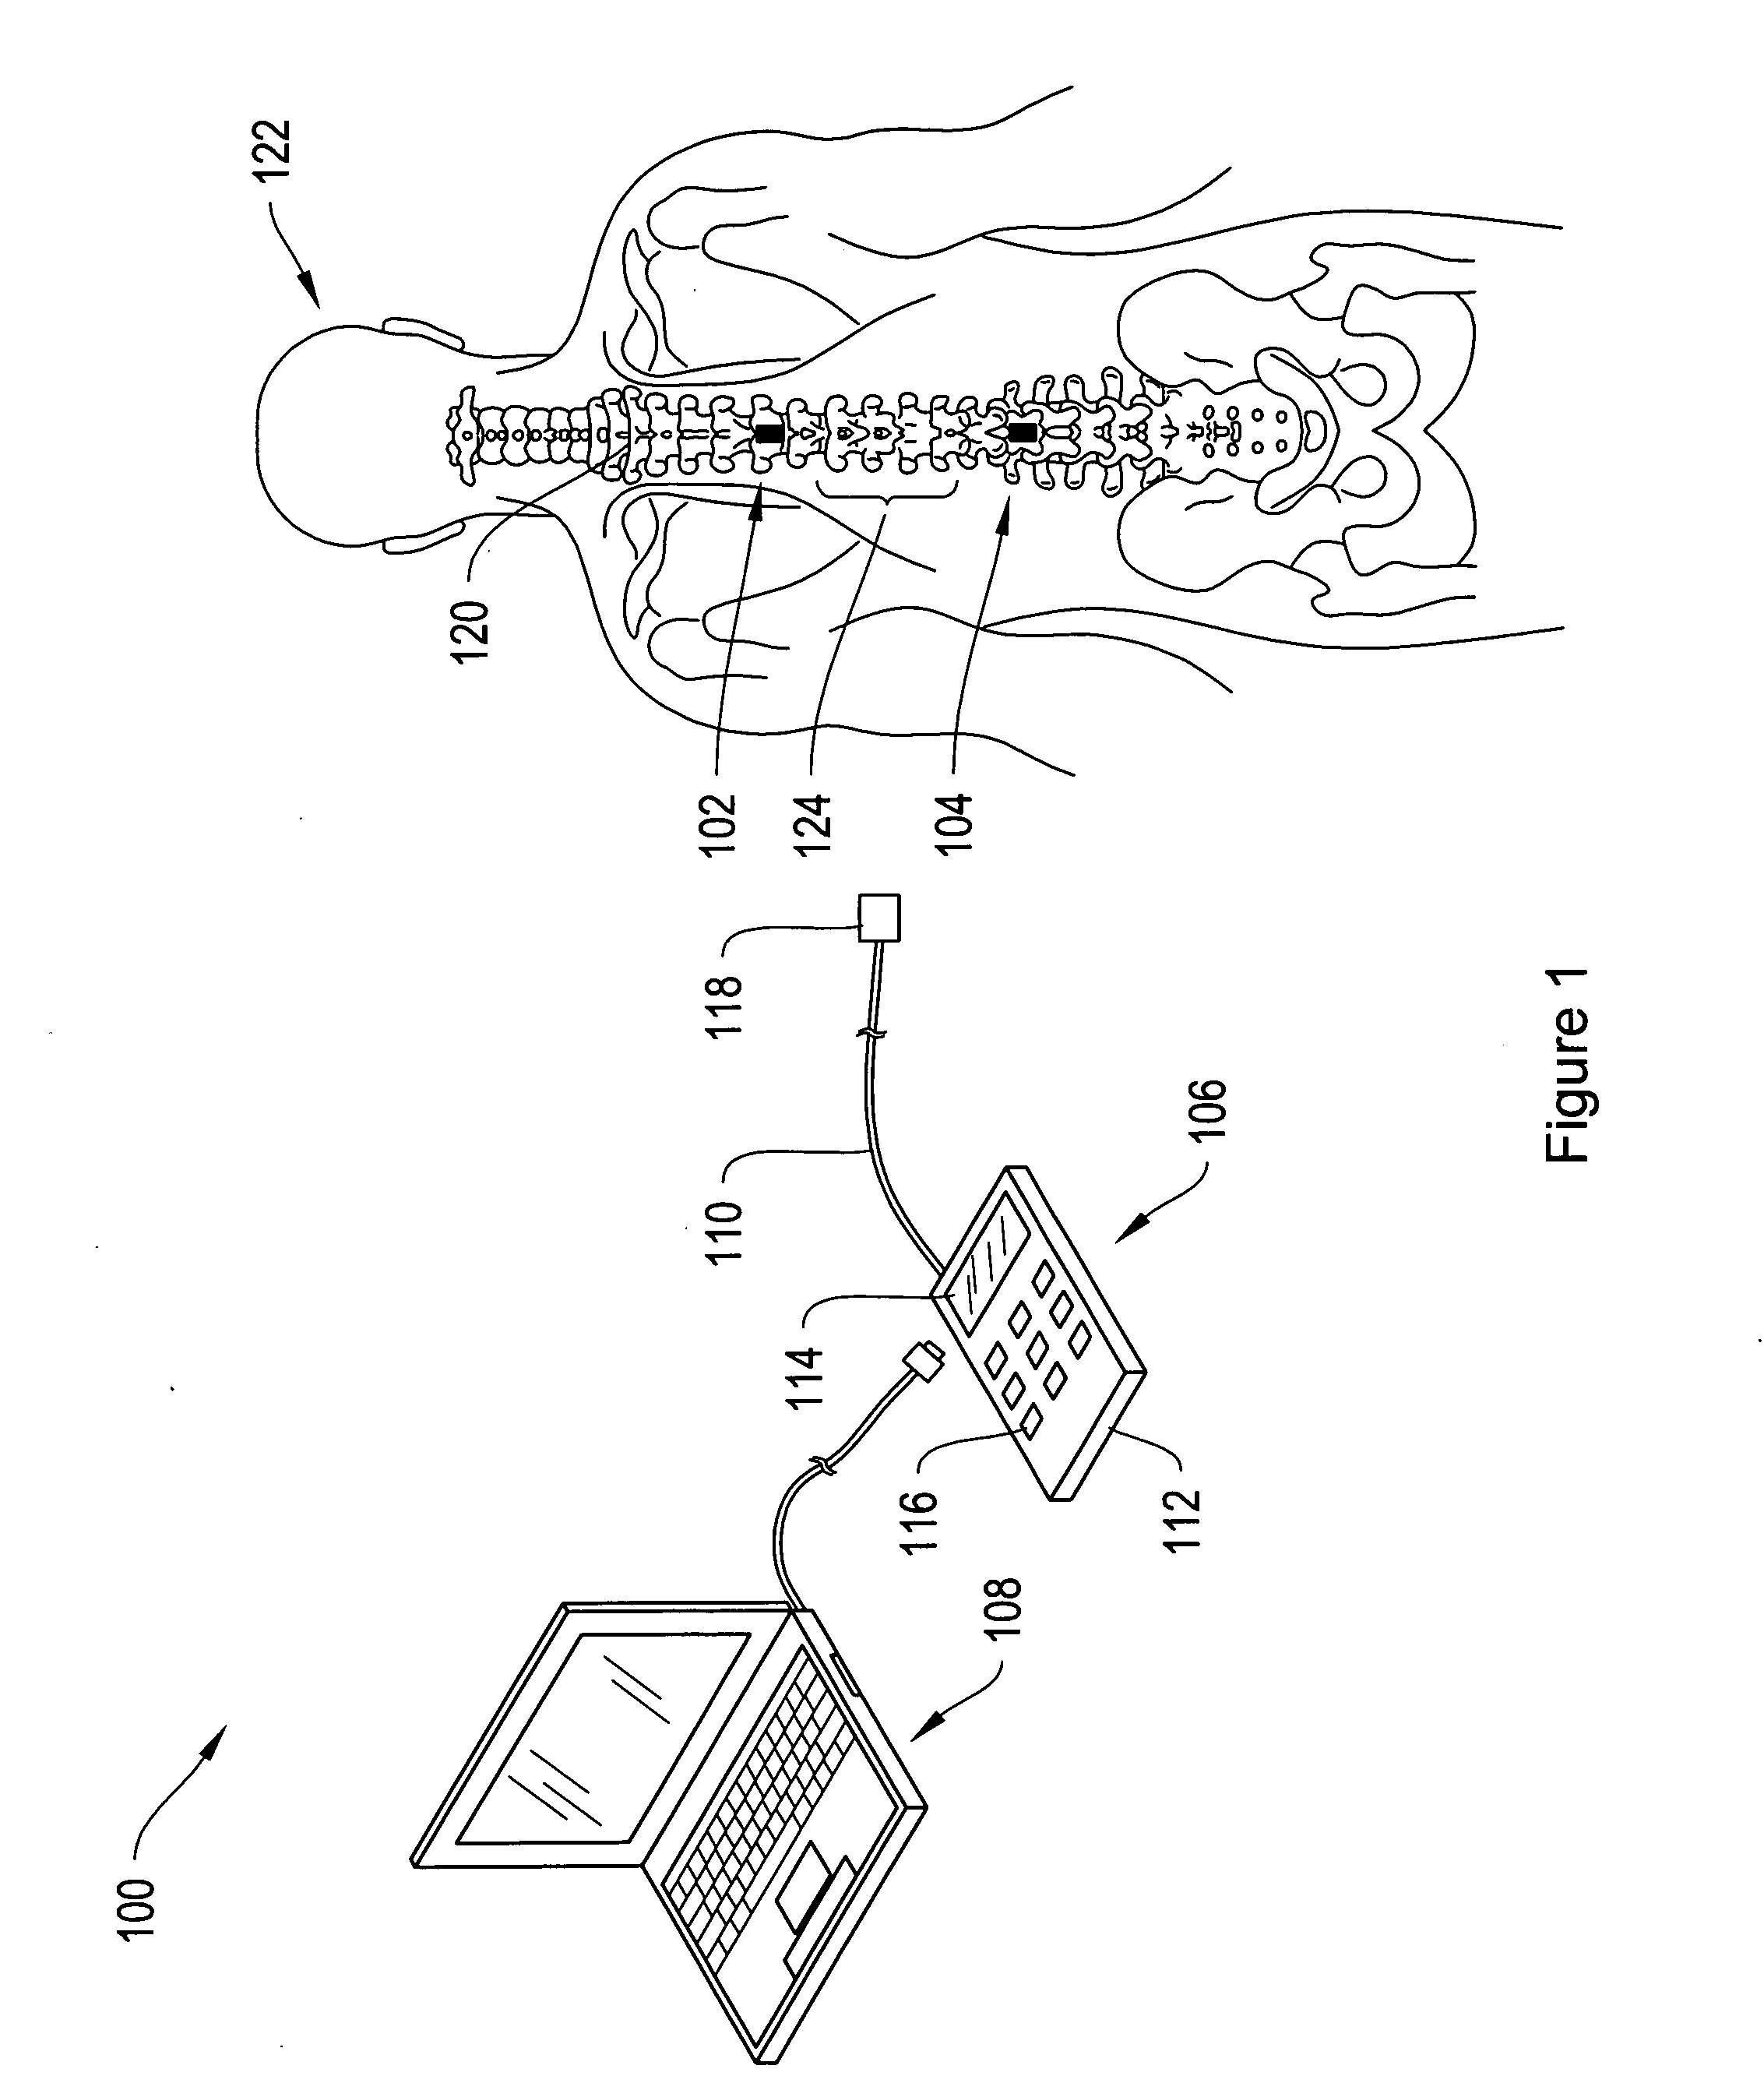 Spinal cord implant systems and methods